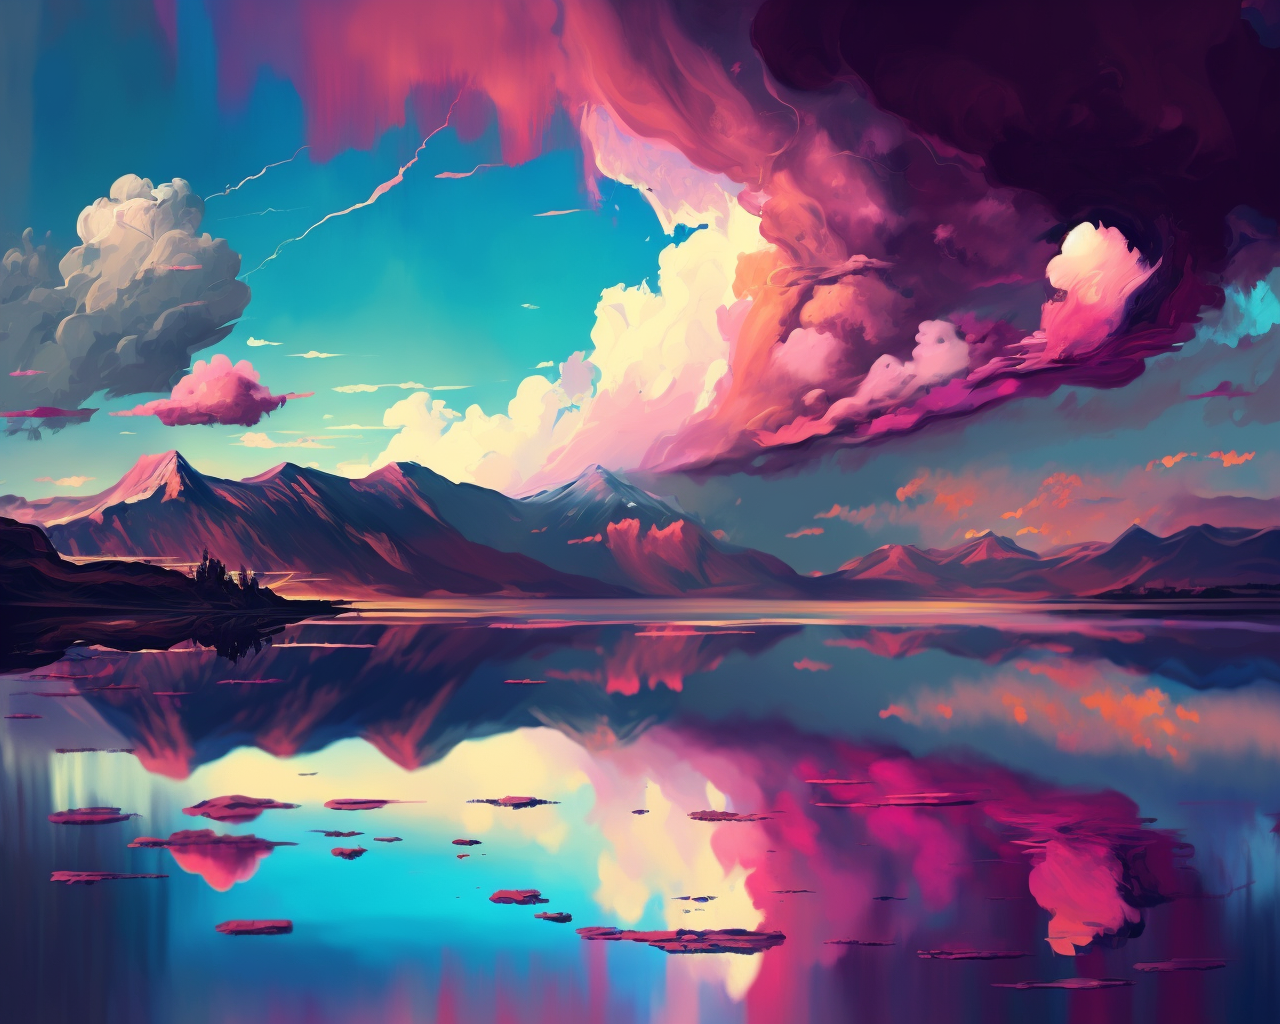 Colorful Clouds 5D Diamond Painting Kit on Sale!, Abstract Full